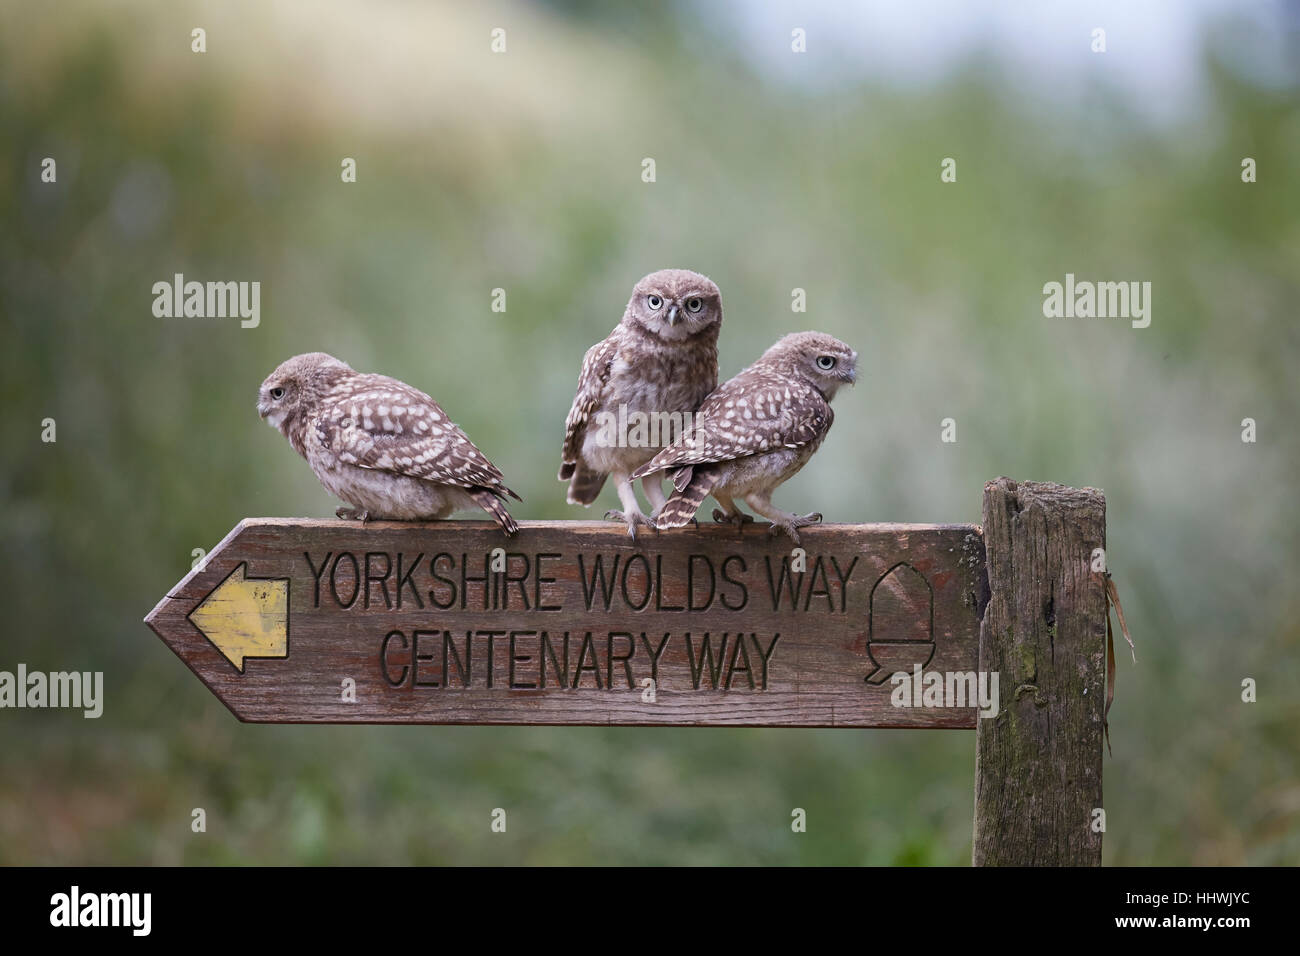 Three Little Owl owlets, Athene noctua perched on a Yorkshire Wolds Way Centenary Way wooden sign post, East Yorkshire, UK. Stock Photo